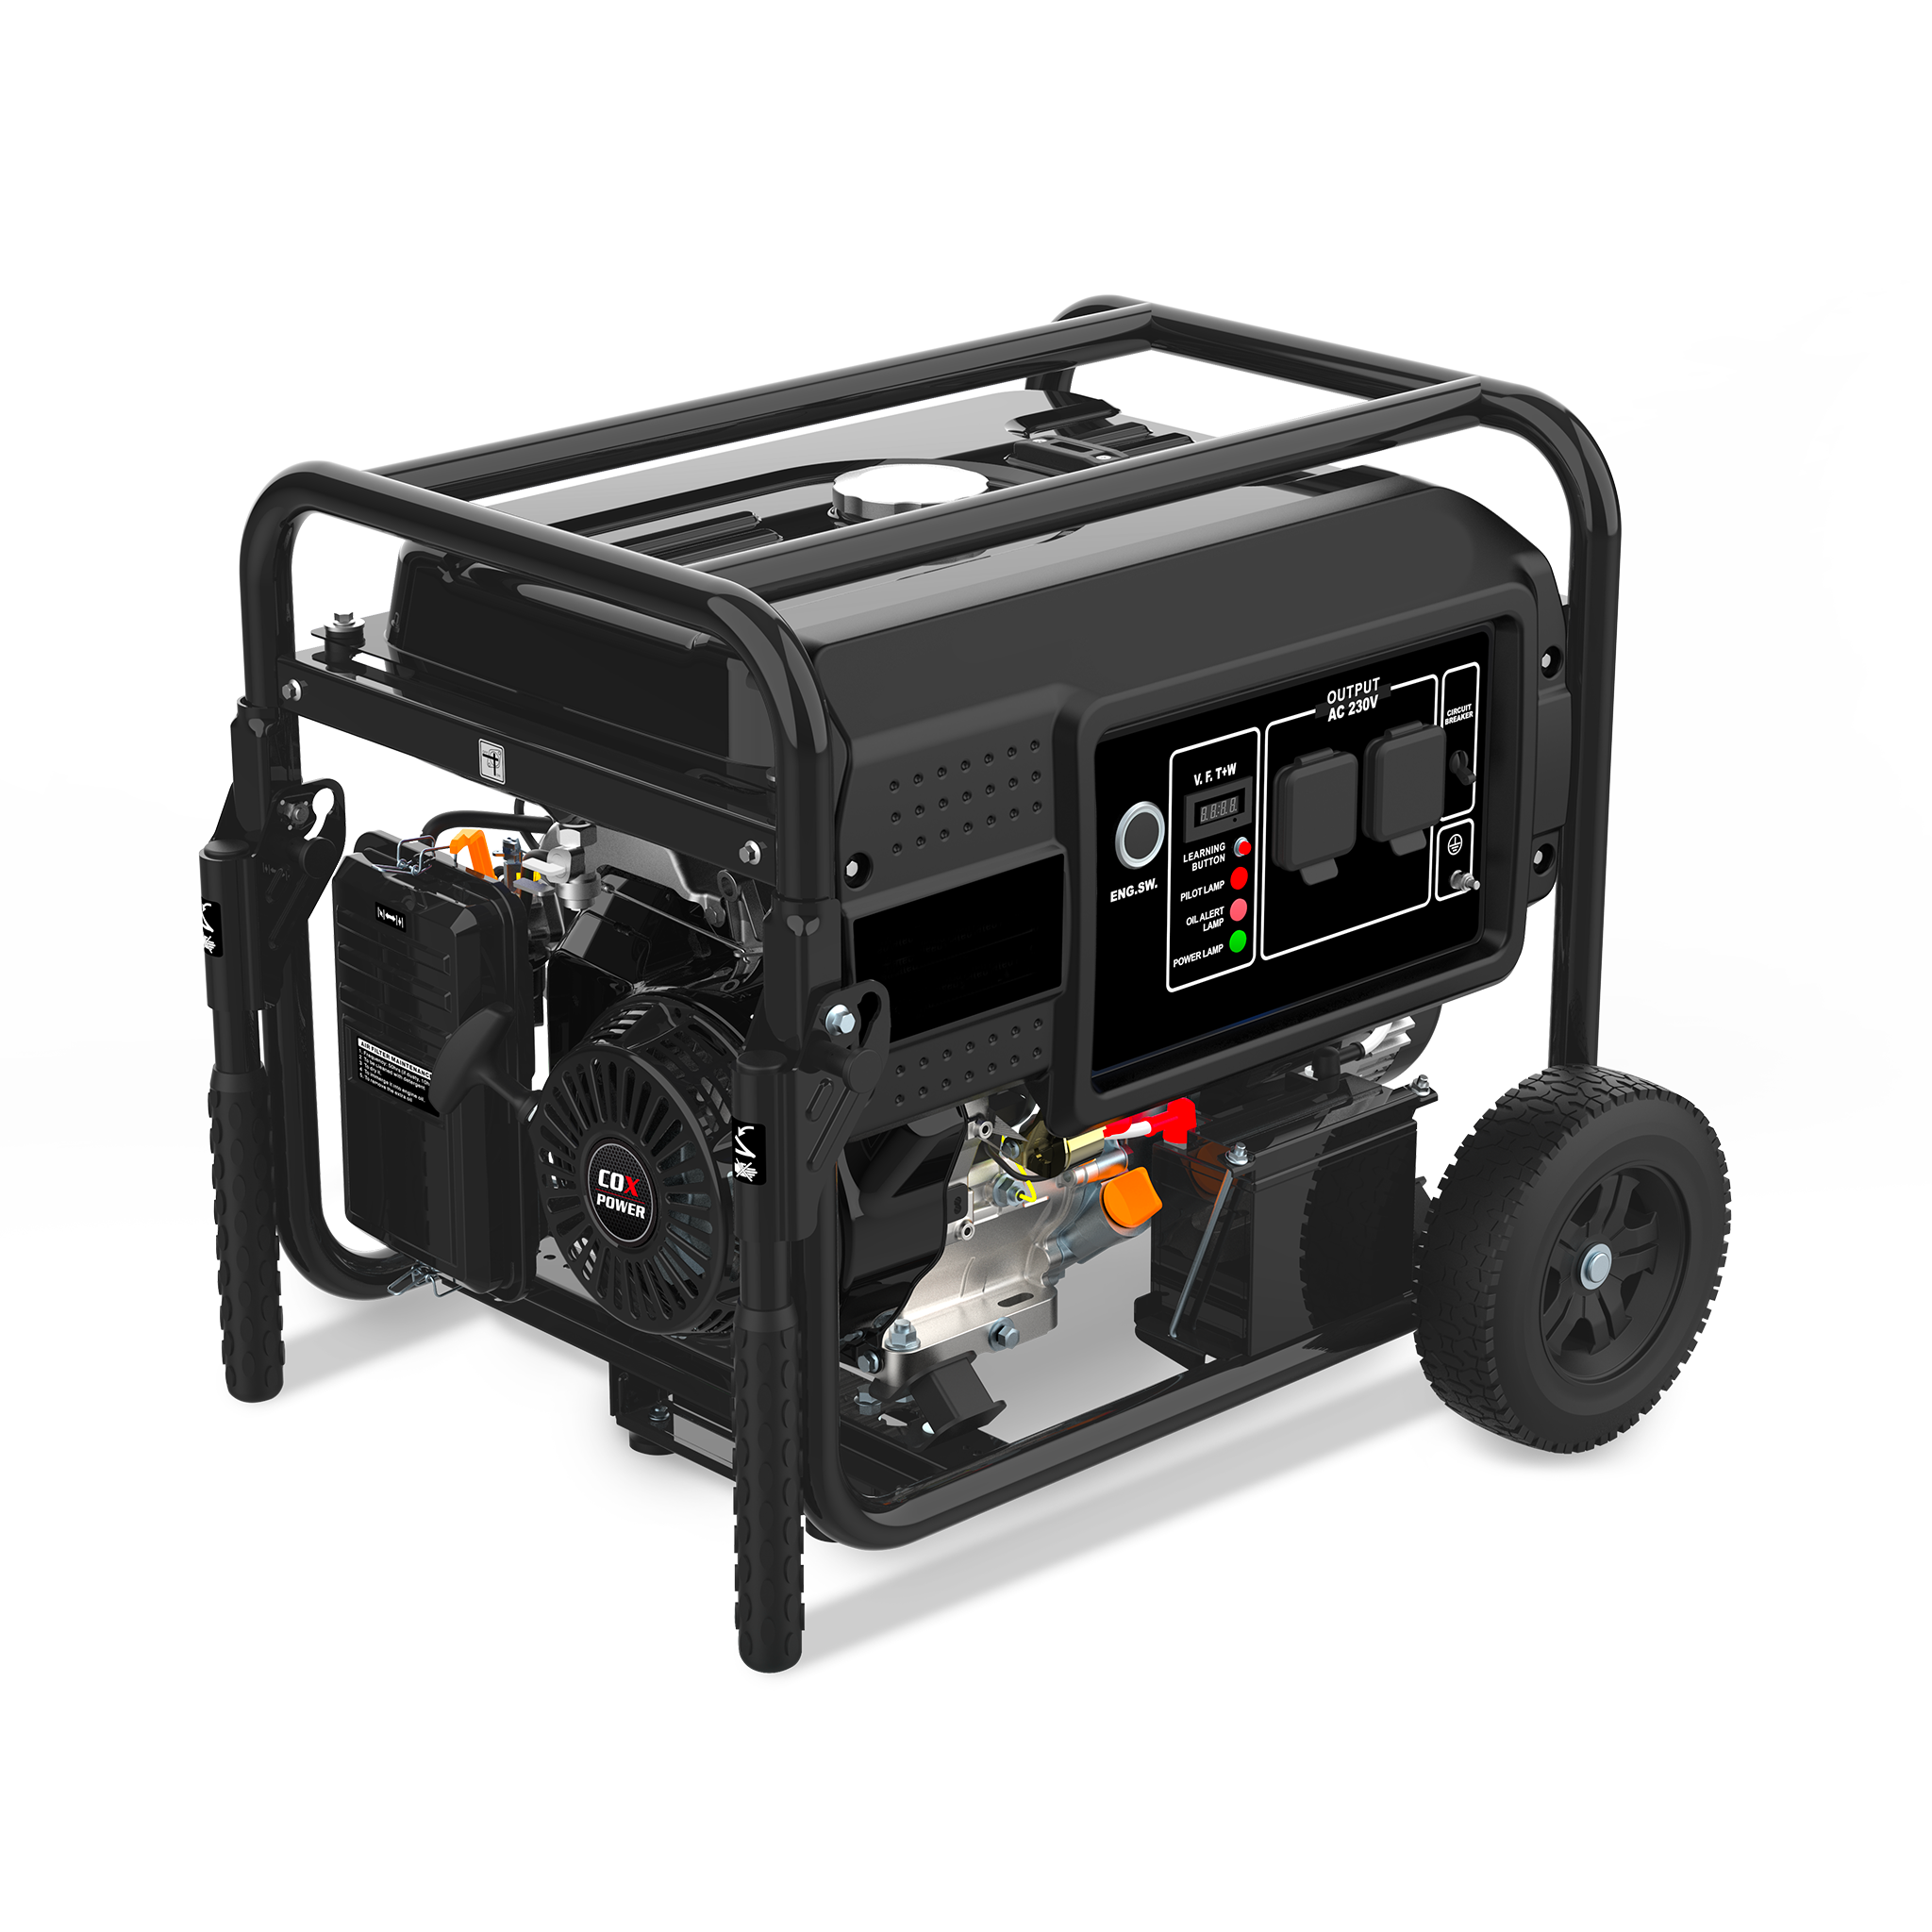 COX Power product image of a 5.5kw Electric Start Generator